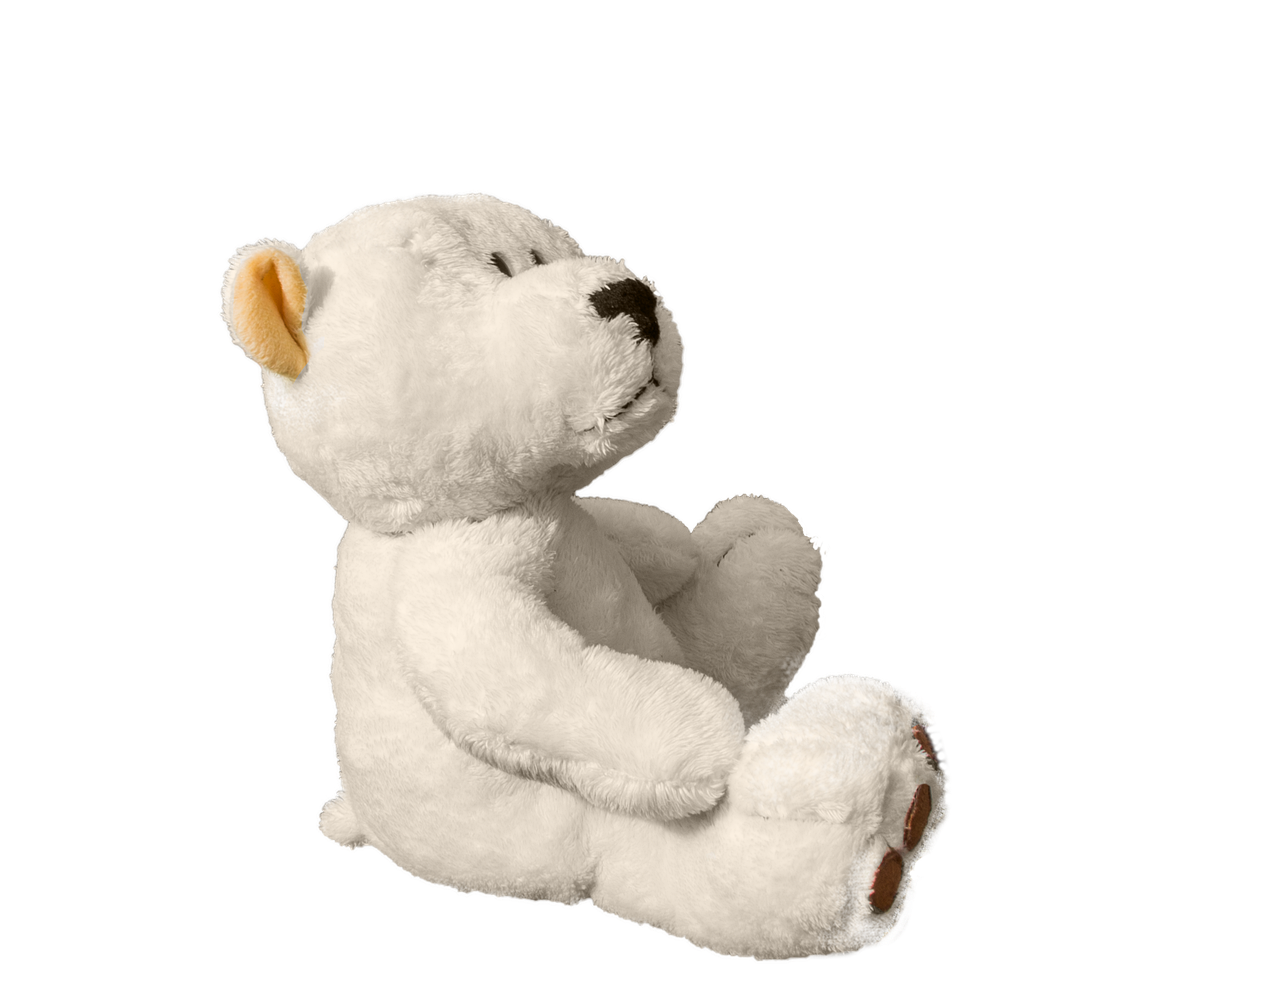 a white teddy bear sitting on a black background, a raytraced image, hurufiyya, light lighting side view, high resolution product photo, childrens toy, high detail product photo